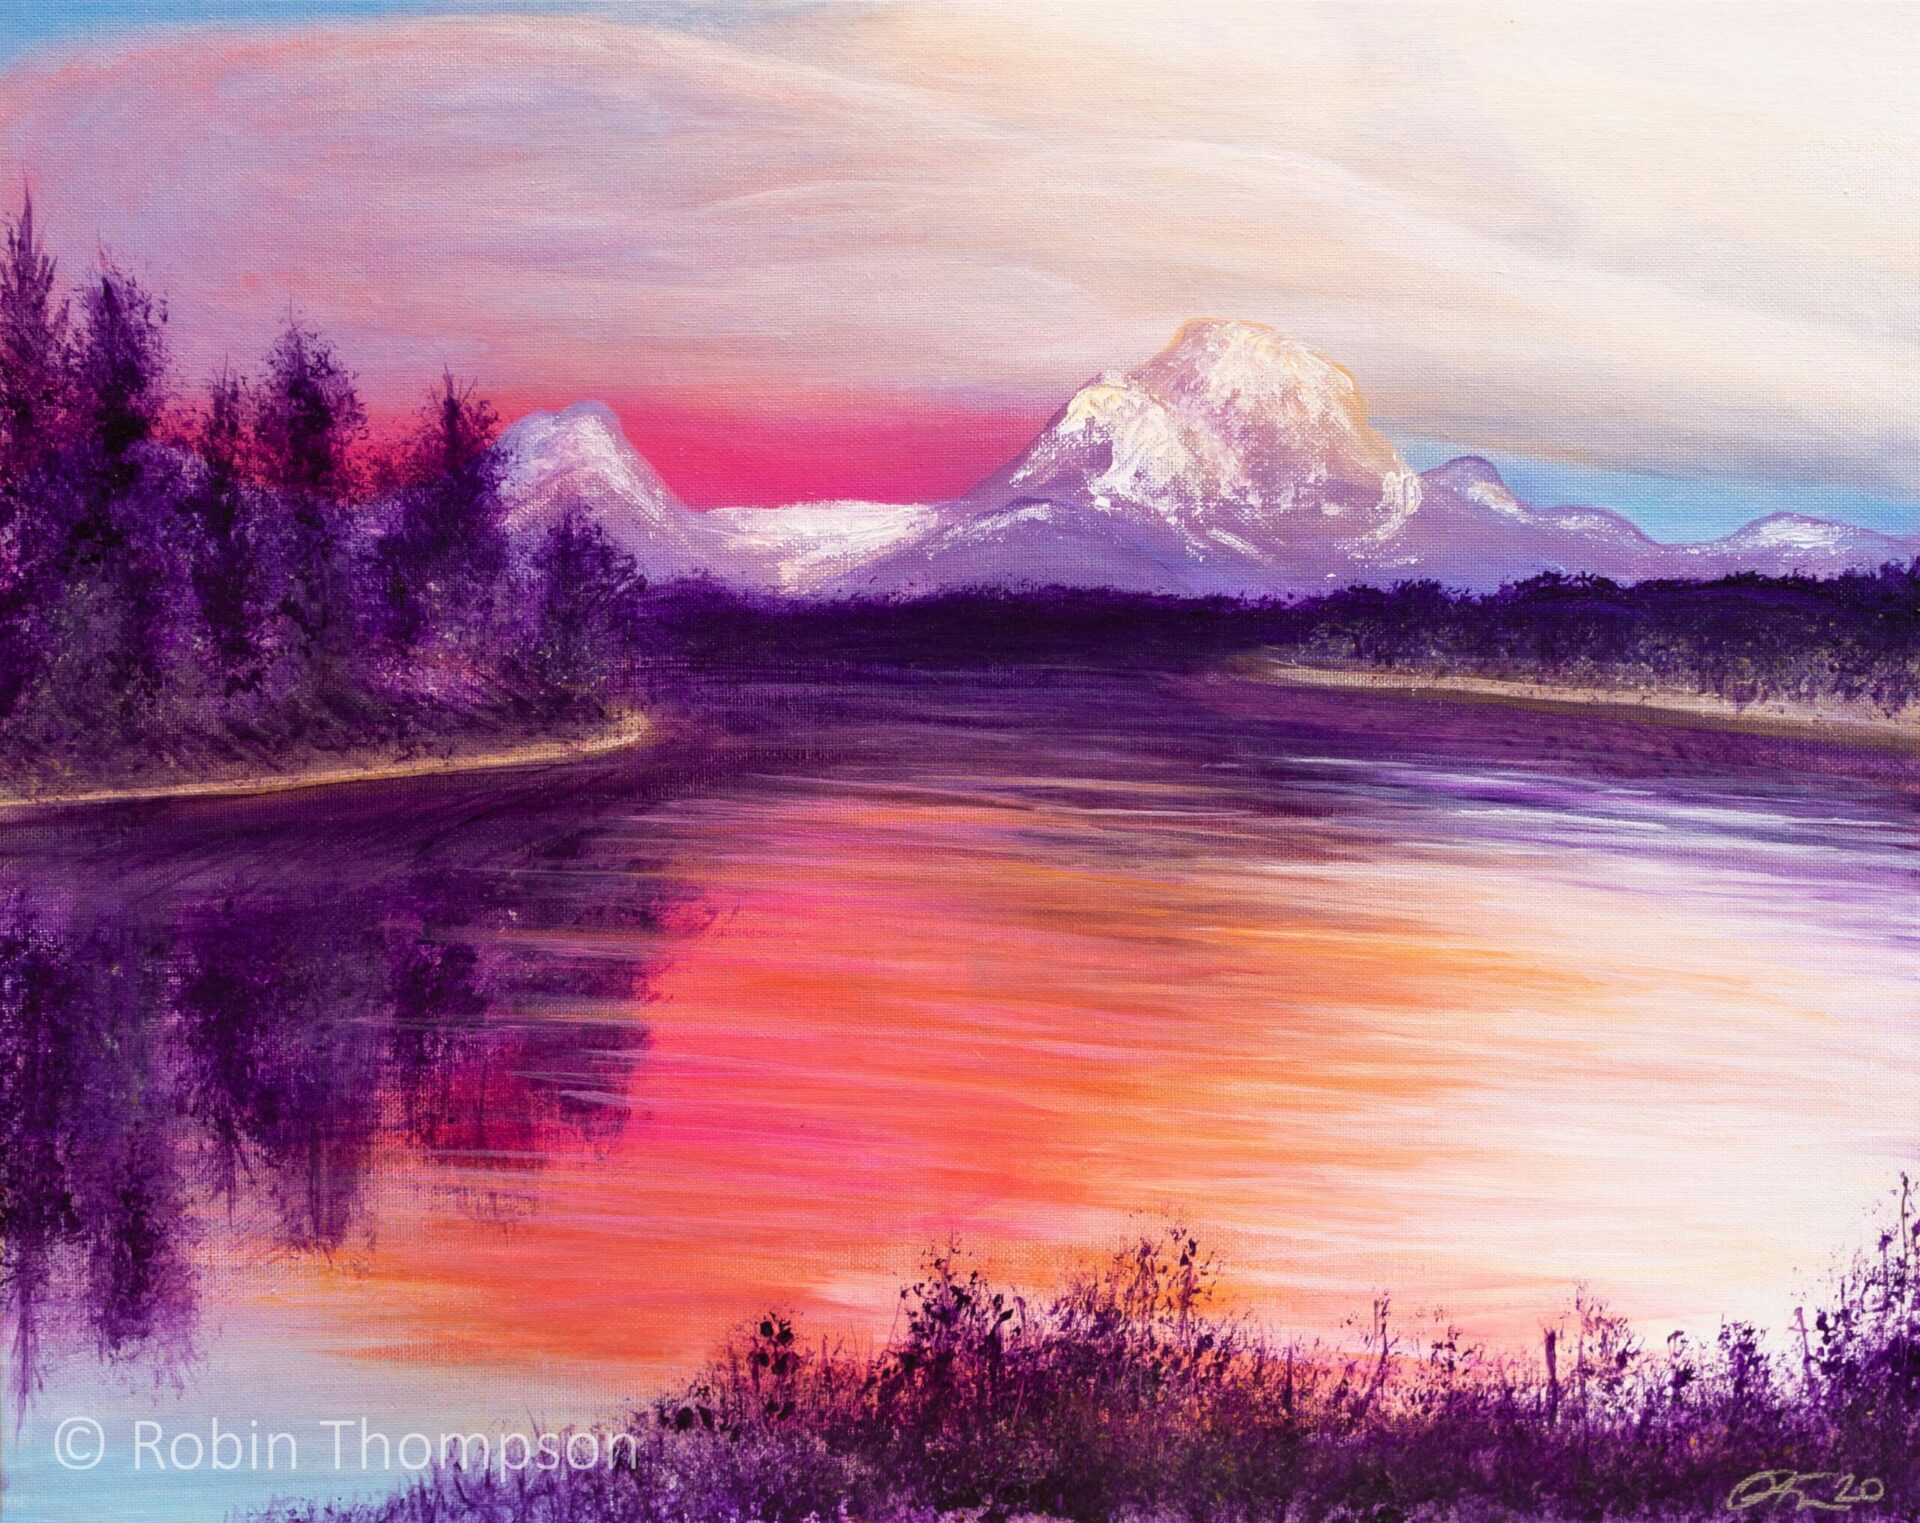 An acrylic painting of a mountain scene, with a large lake in the foreground, painted mostly in purples, pinks and oranges. Large fluffy clouds are seen at the top of the painting, and the lake reflects a purple forest in the middle.